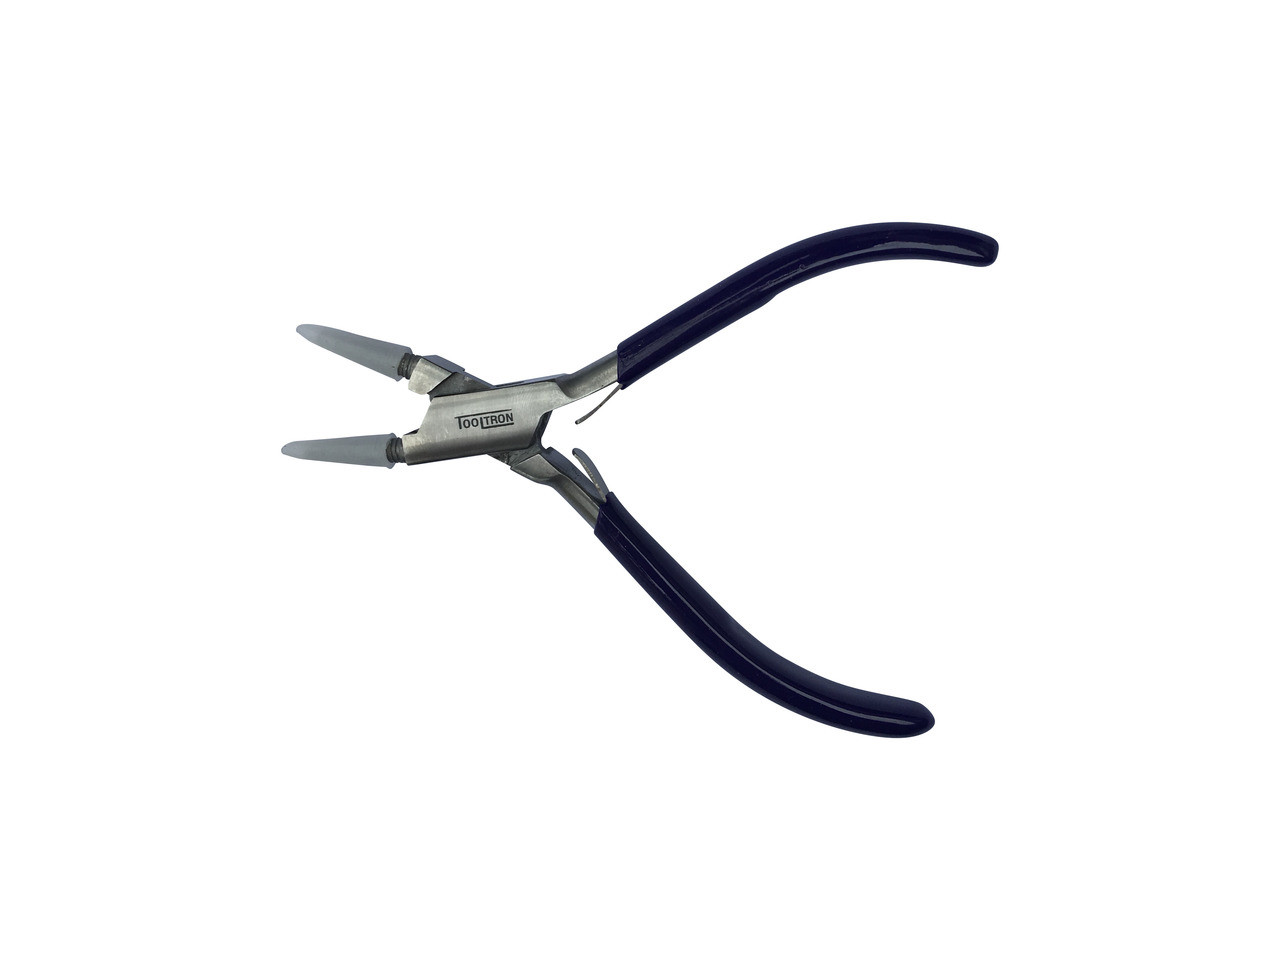 Nylon Jaw Coiling Pliers, Round and Flat Jaw, 5-1/2 Inches PLR-846.00 